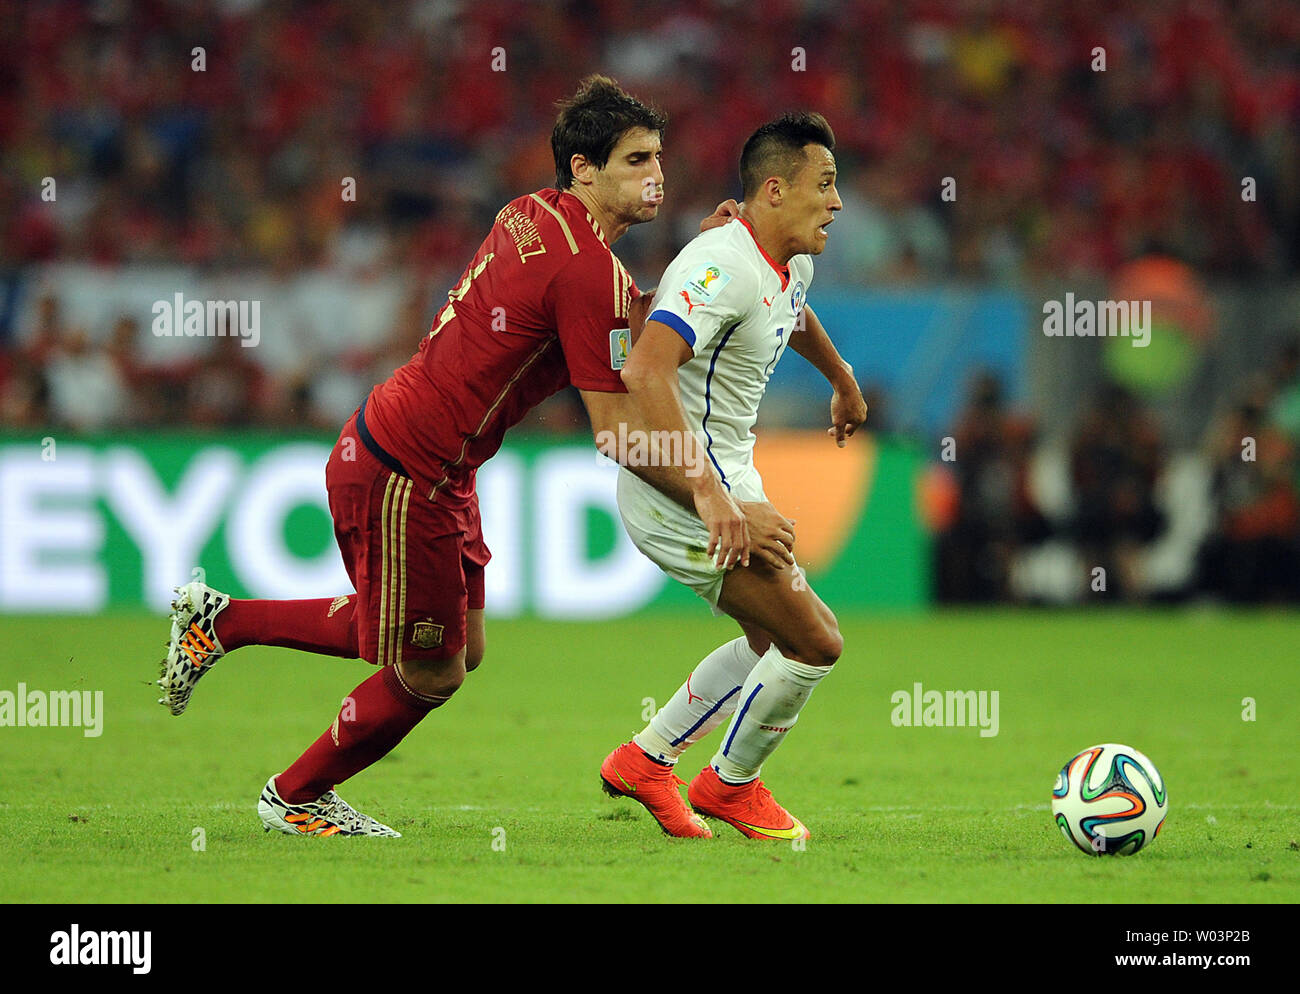 Javi Martinez (L) of Spain competes with Alexis Sanchez of Chile during the 2014 FIFA World Cup Group B match at the Estadio do Maracana in Rio de Janeiro, Brazil on June 18, 2014. UPI/Chris Brunskill Stock Photo